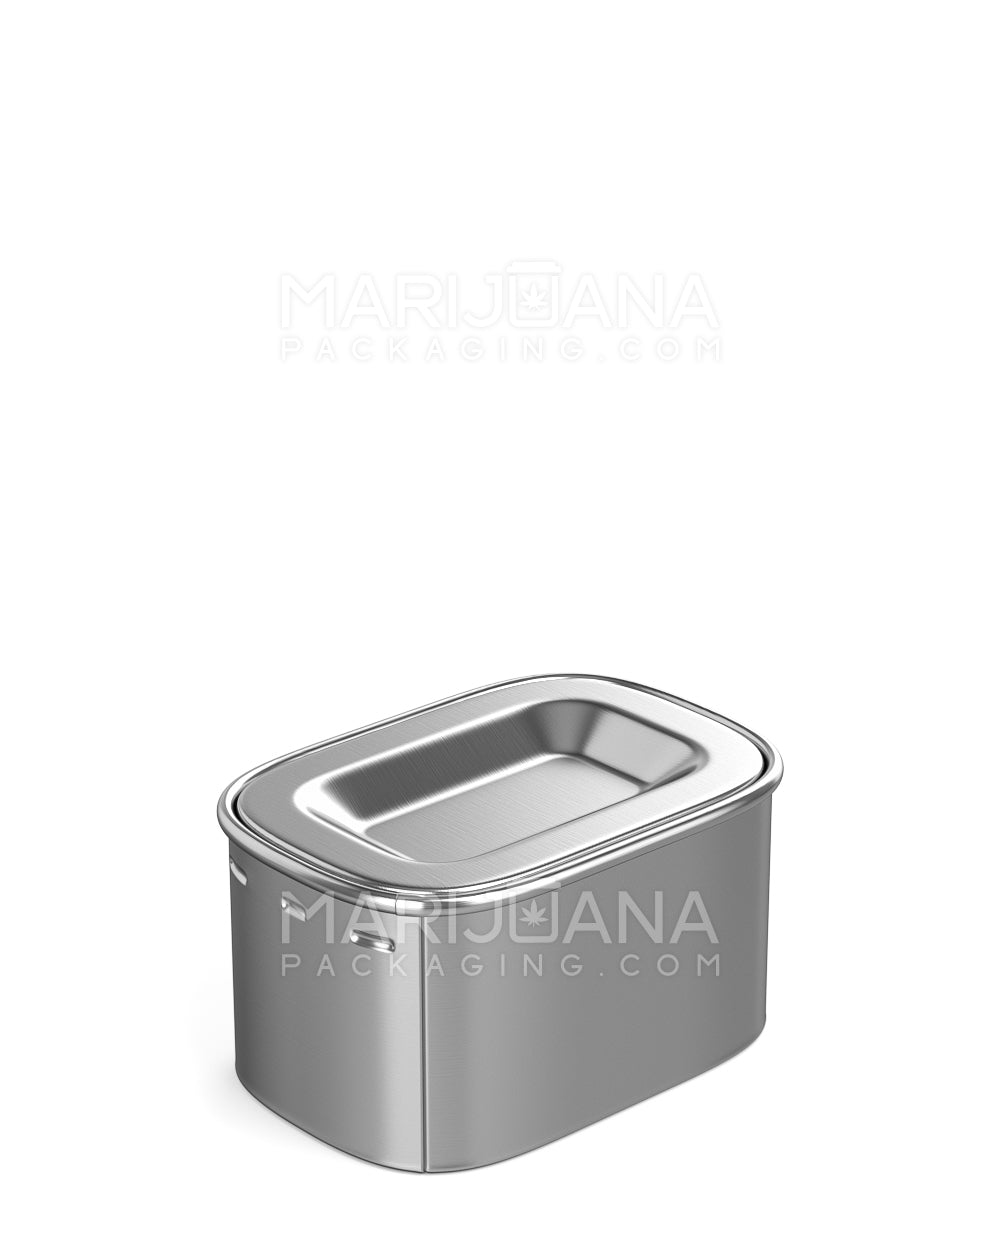 Child Resistant & Sustainable | 100% Recyclable PushTin Small Container | 1oz - Silver Tin - 250 Count - 4